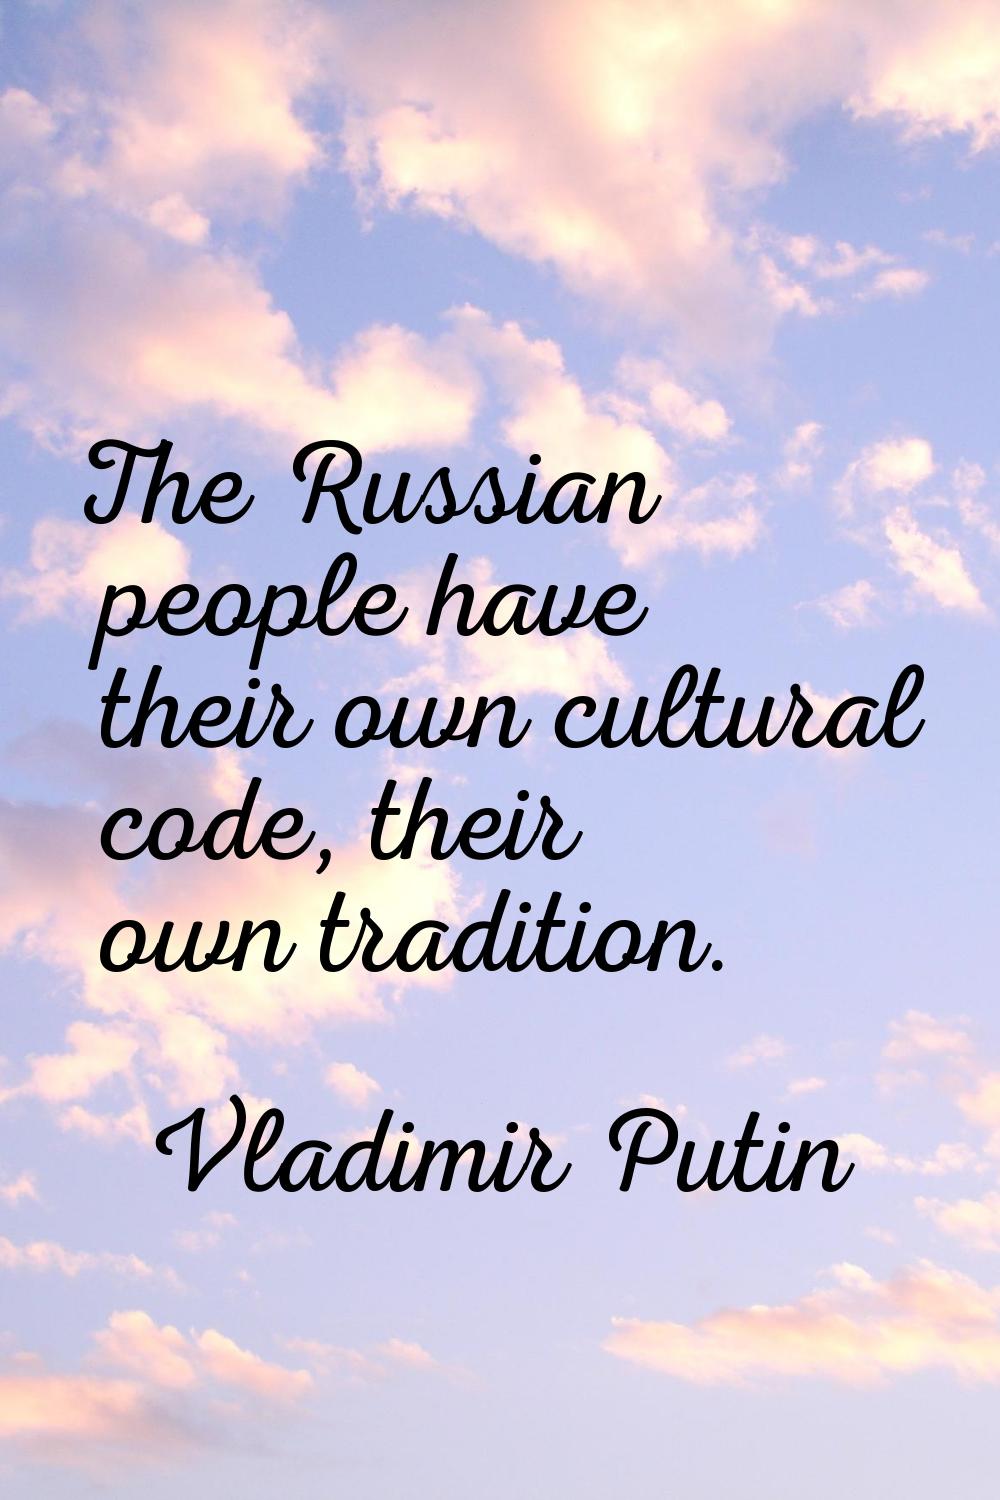 The Russian people have their own cultural code, their own tradition.